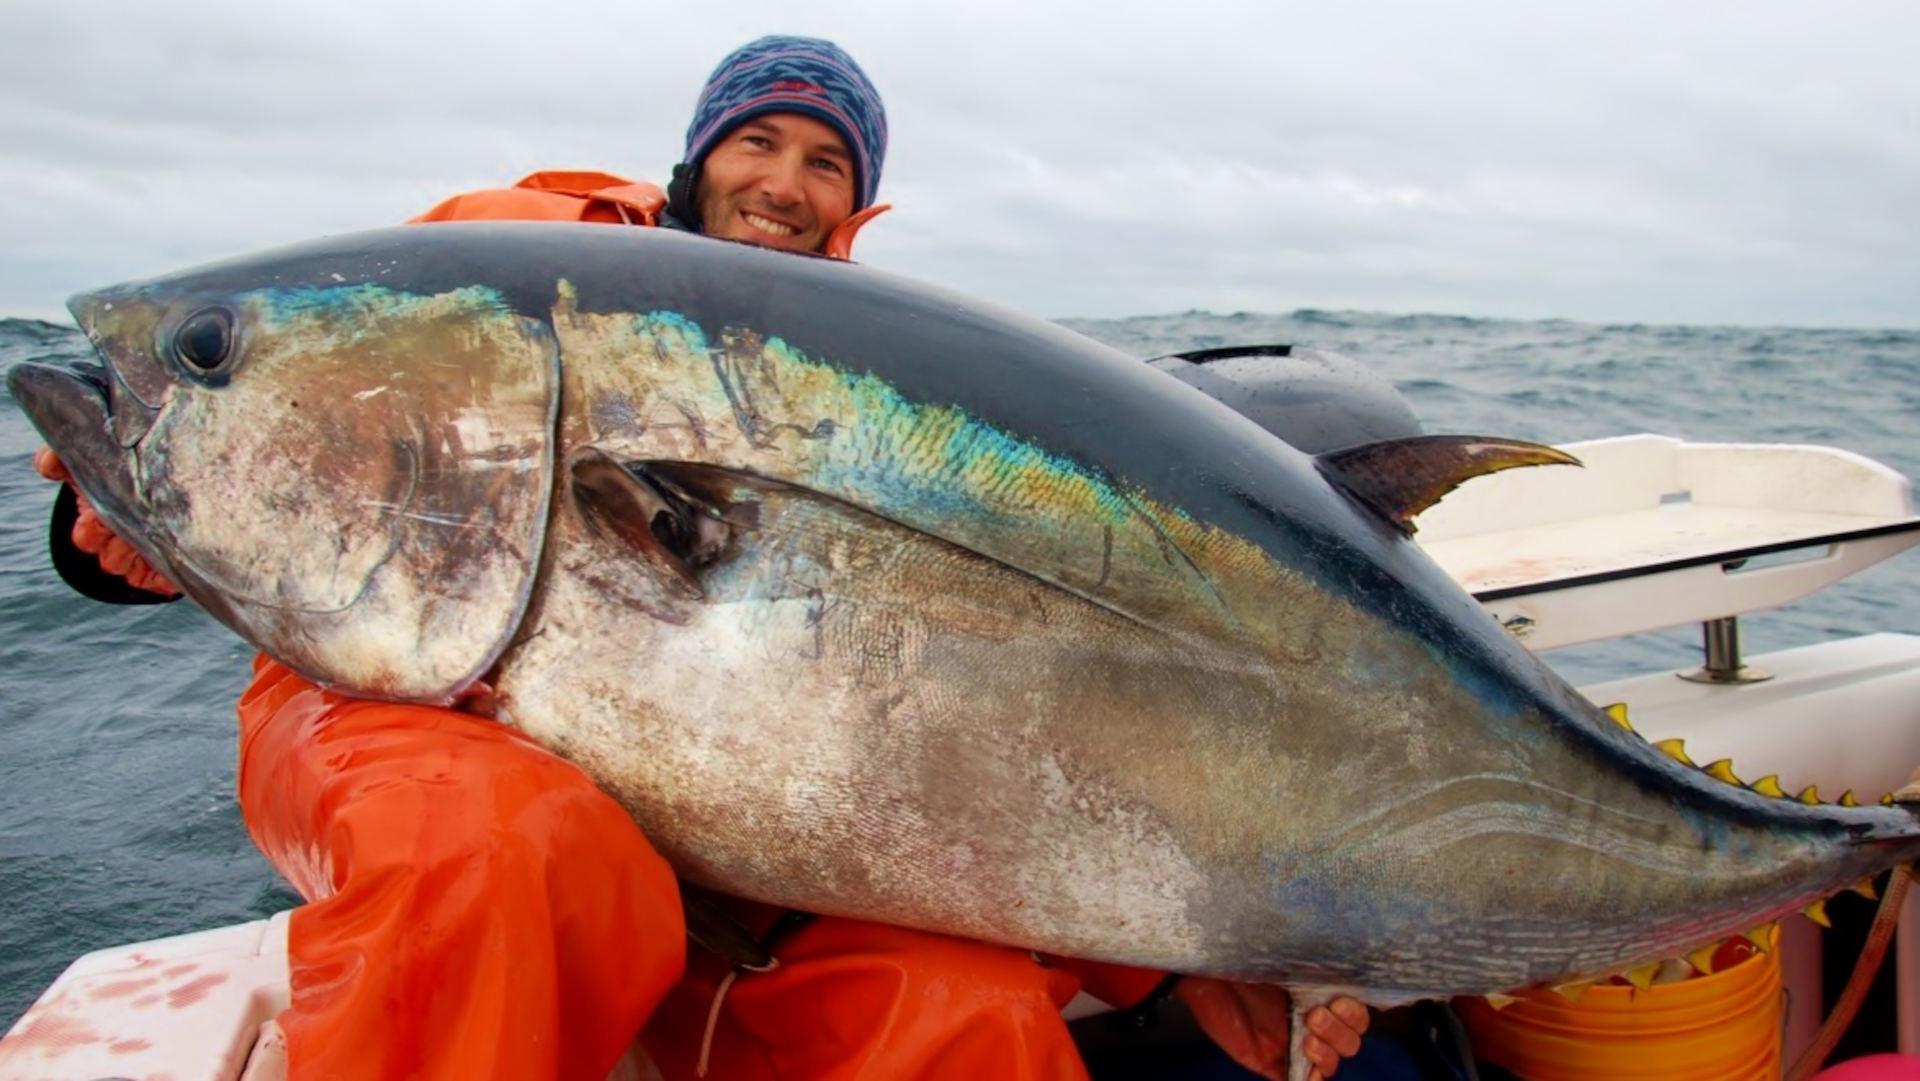 Book Review: In Bluefin Tuna, Fisheries Science Is Never Neat